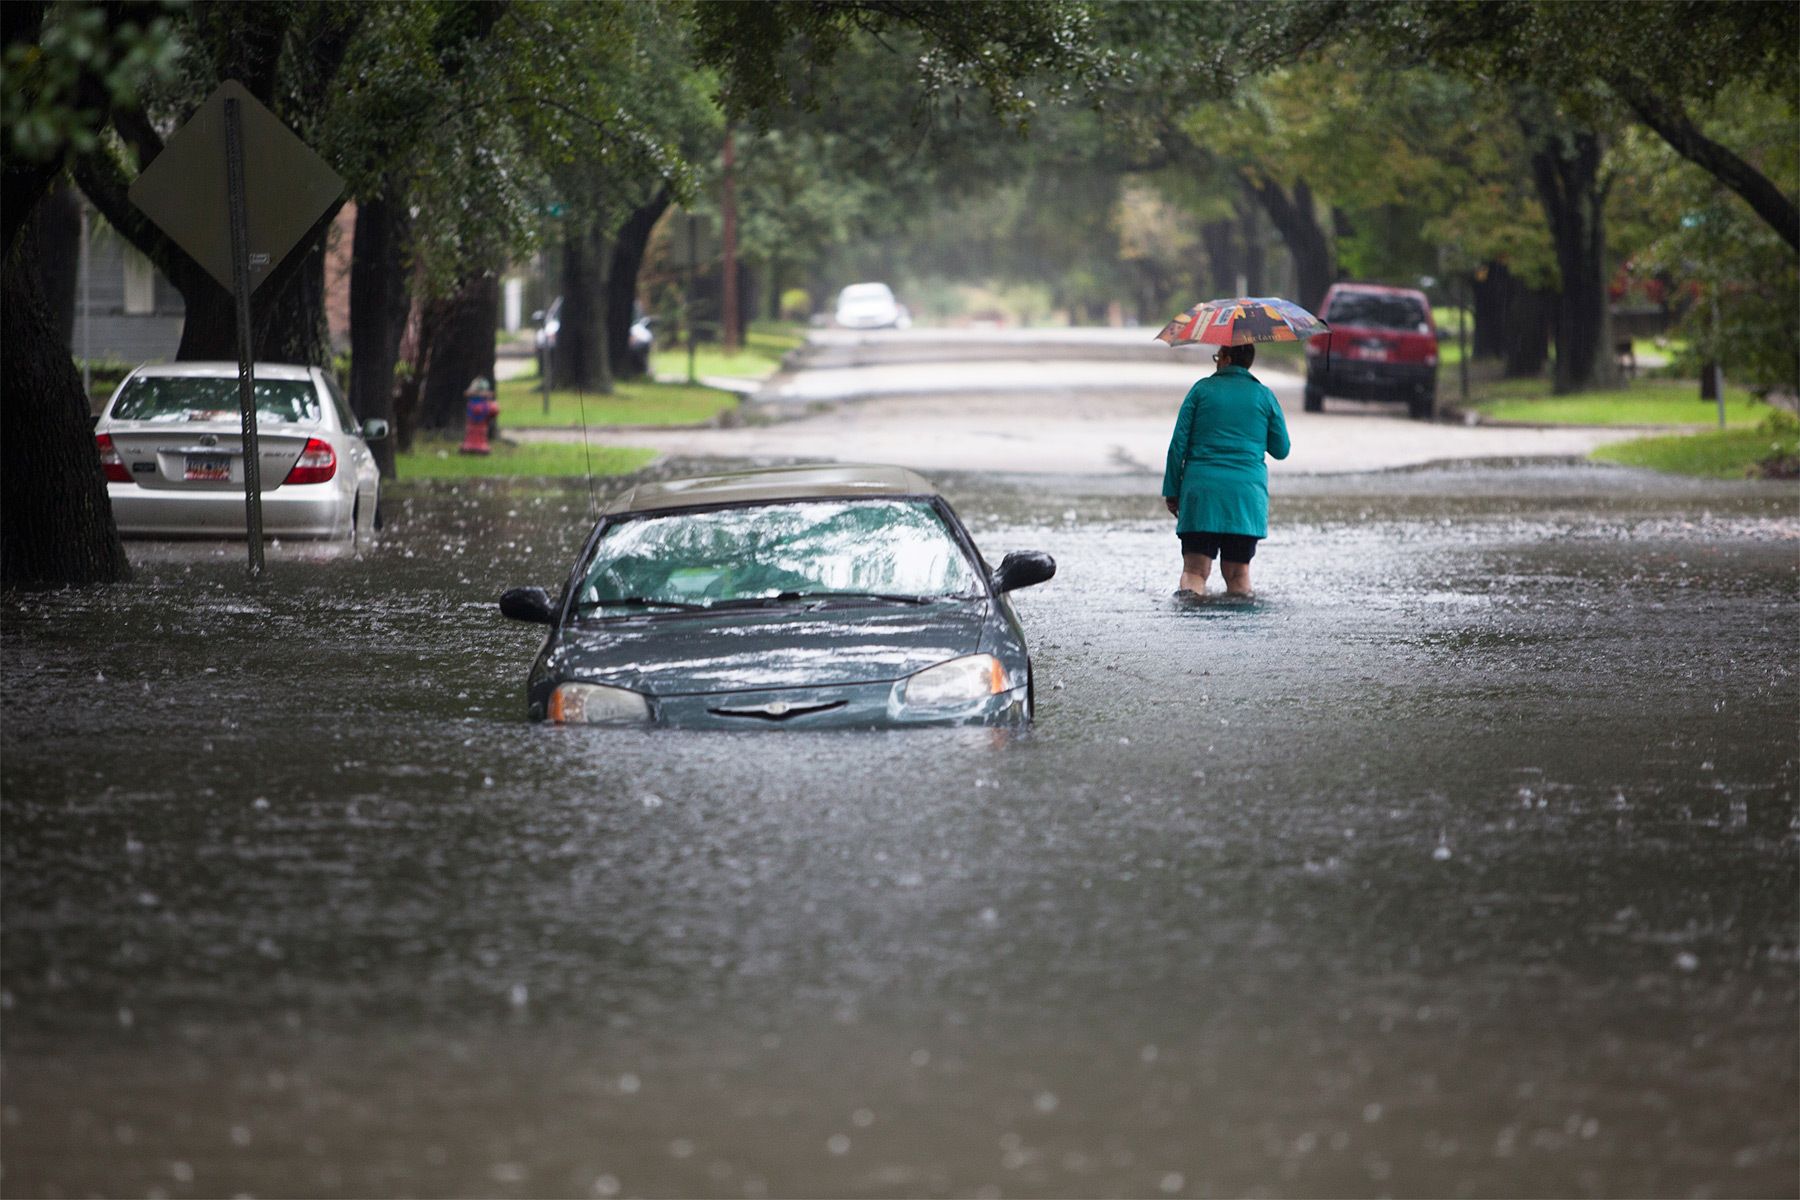 Clare Reigard of Georgetown, South Carolina, abandons her car after it stalled on Duke Street due to heavy rains in Georgetown, South Carolina October 4, 2015. Most major roads through the historical South Carolina city have closed due to flooding. Vast swaths of U.S. Southeast and mid-Atlantic states were grappling with heavy rains and flooding from a separate weather system which has already caused at least five deaths, washed out roads and prompted evacuations and flash flood warnings. REUTERS/Randall Hill